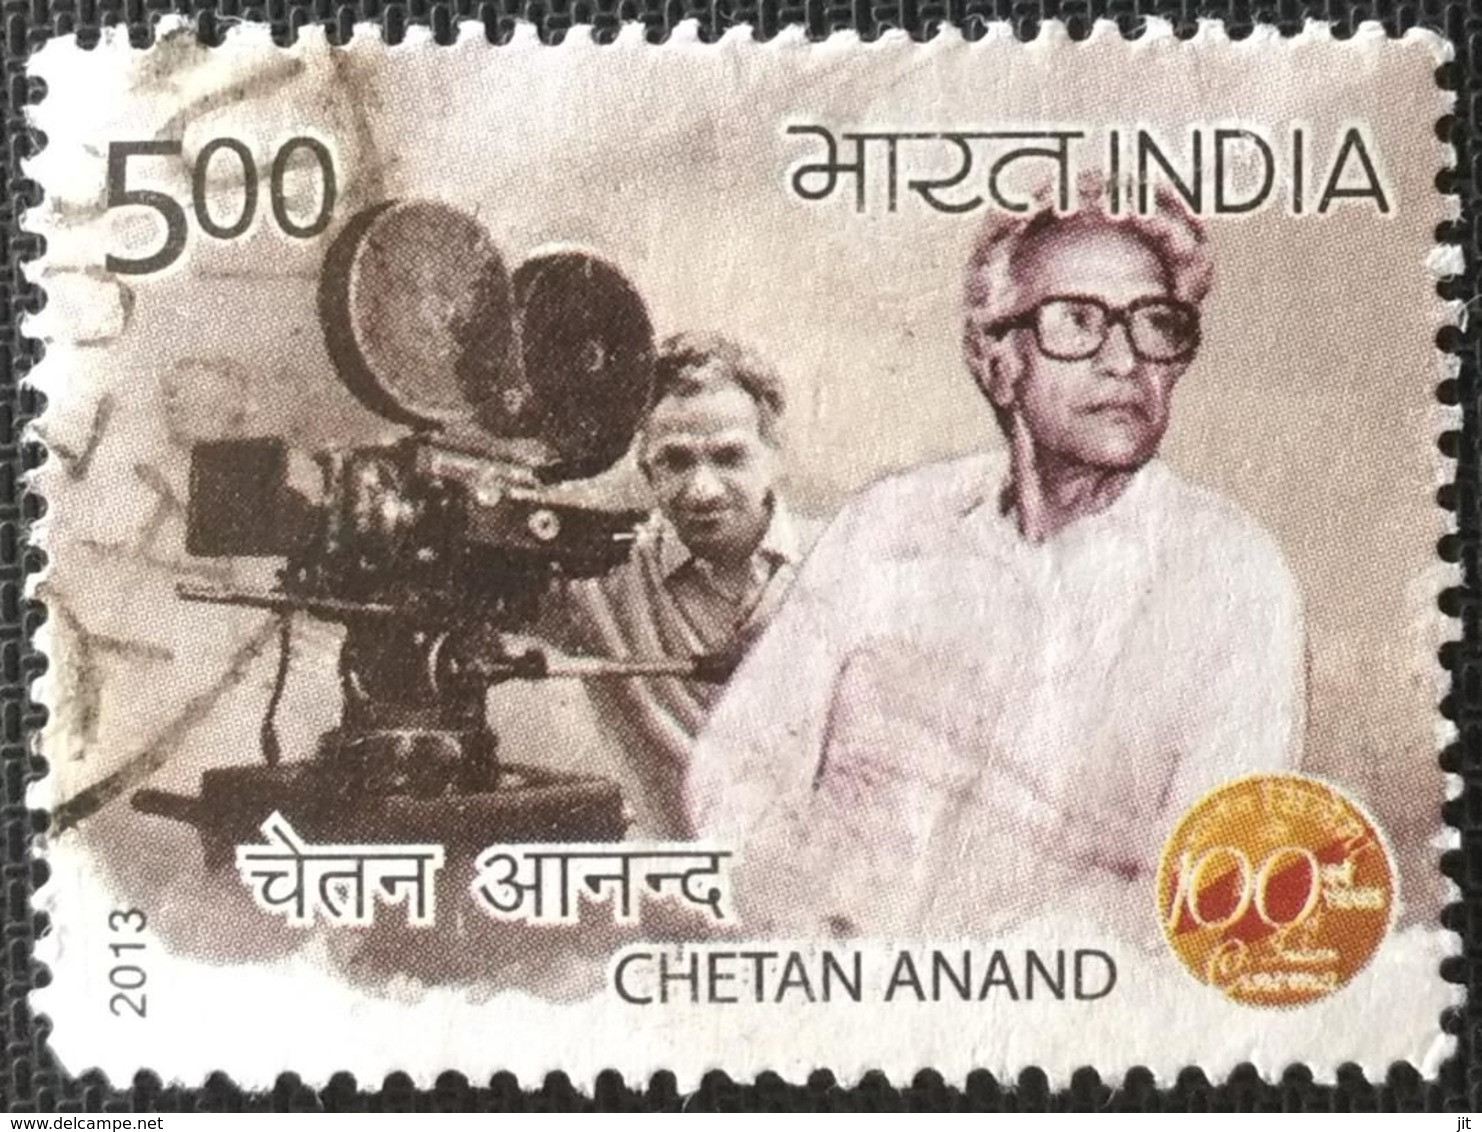 INDIA 2013 USED STAMP 100 YEARS OF INDIAN CINEMA (CHETAN ANAND) - Oblitérés